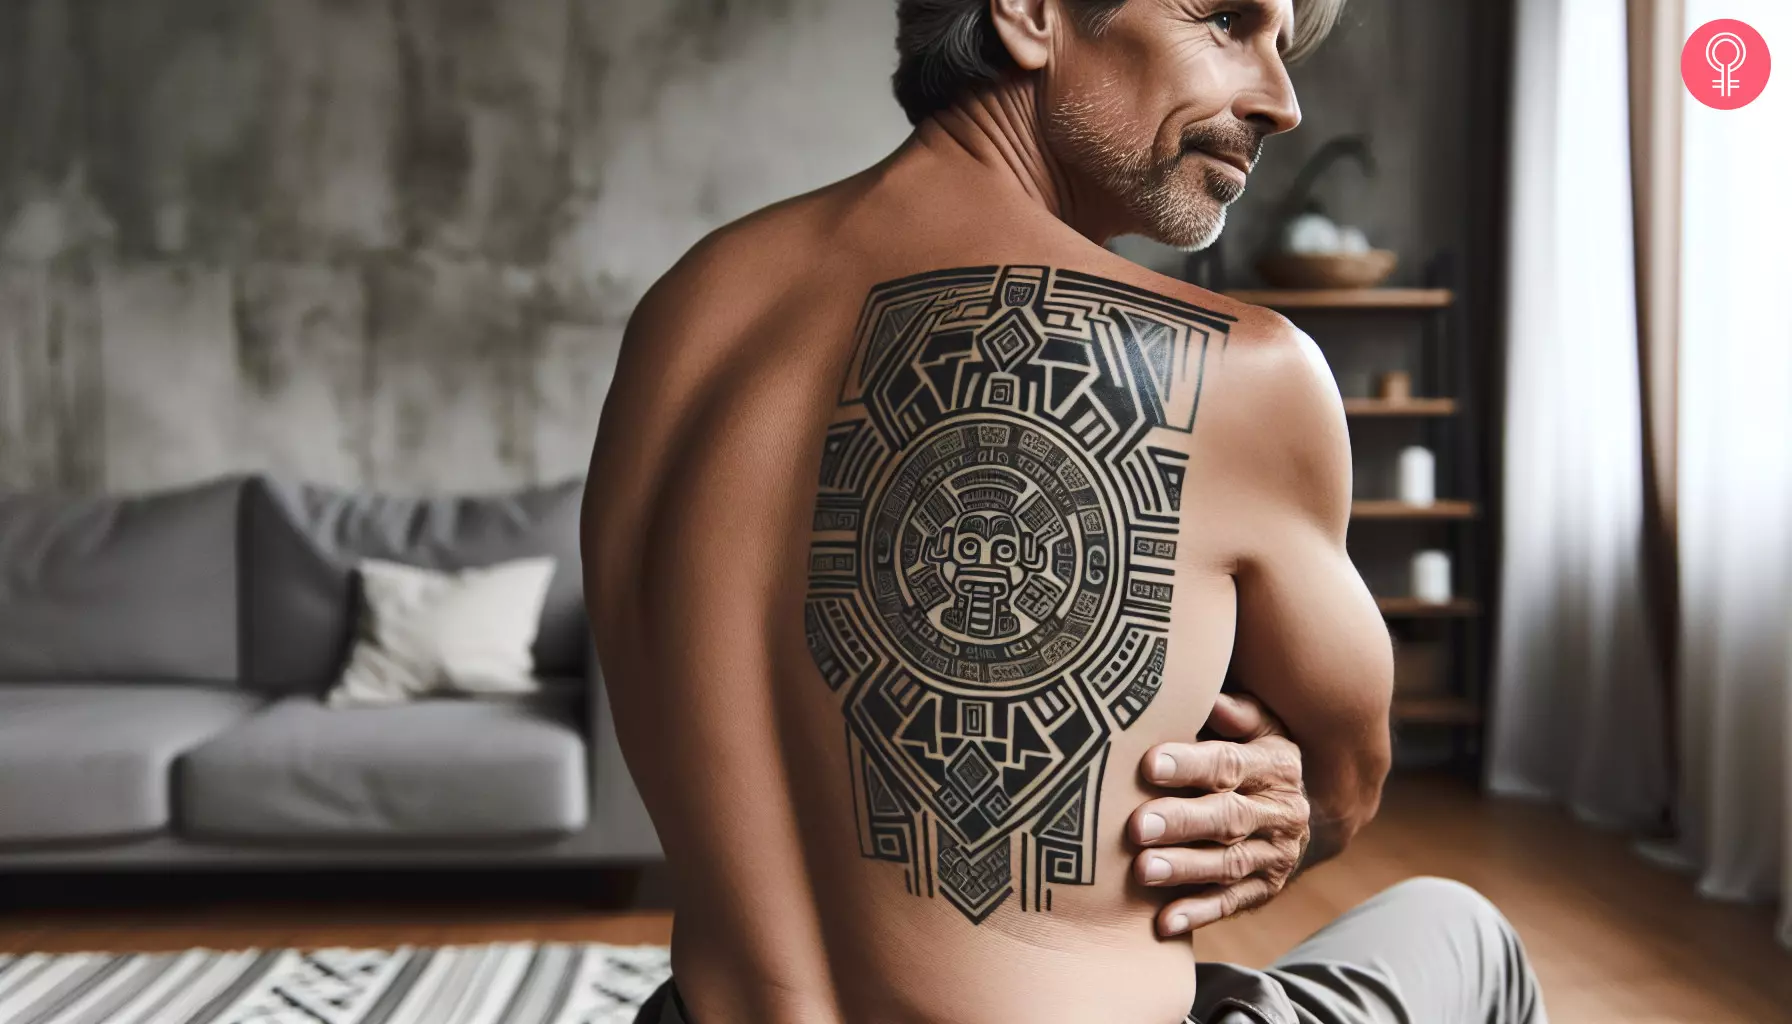 A formidable black work Mayan tattoo design on a man’s back